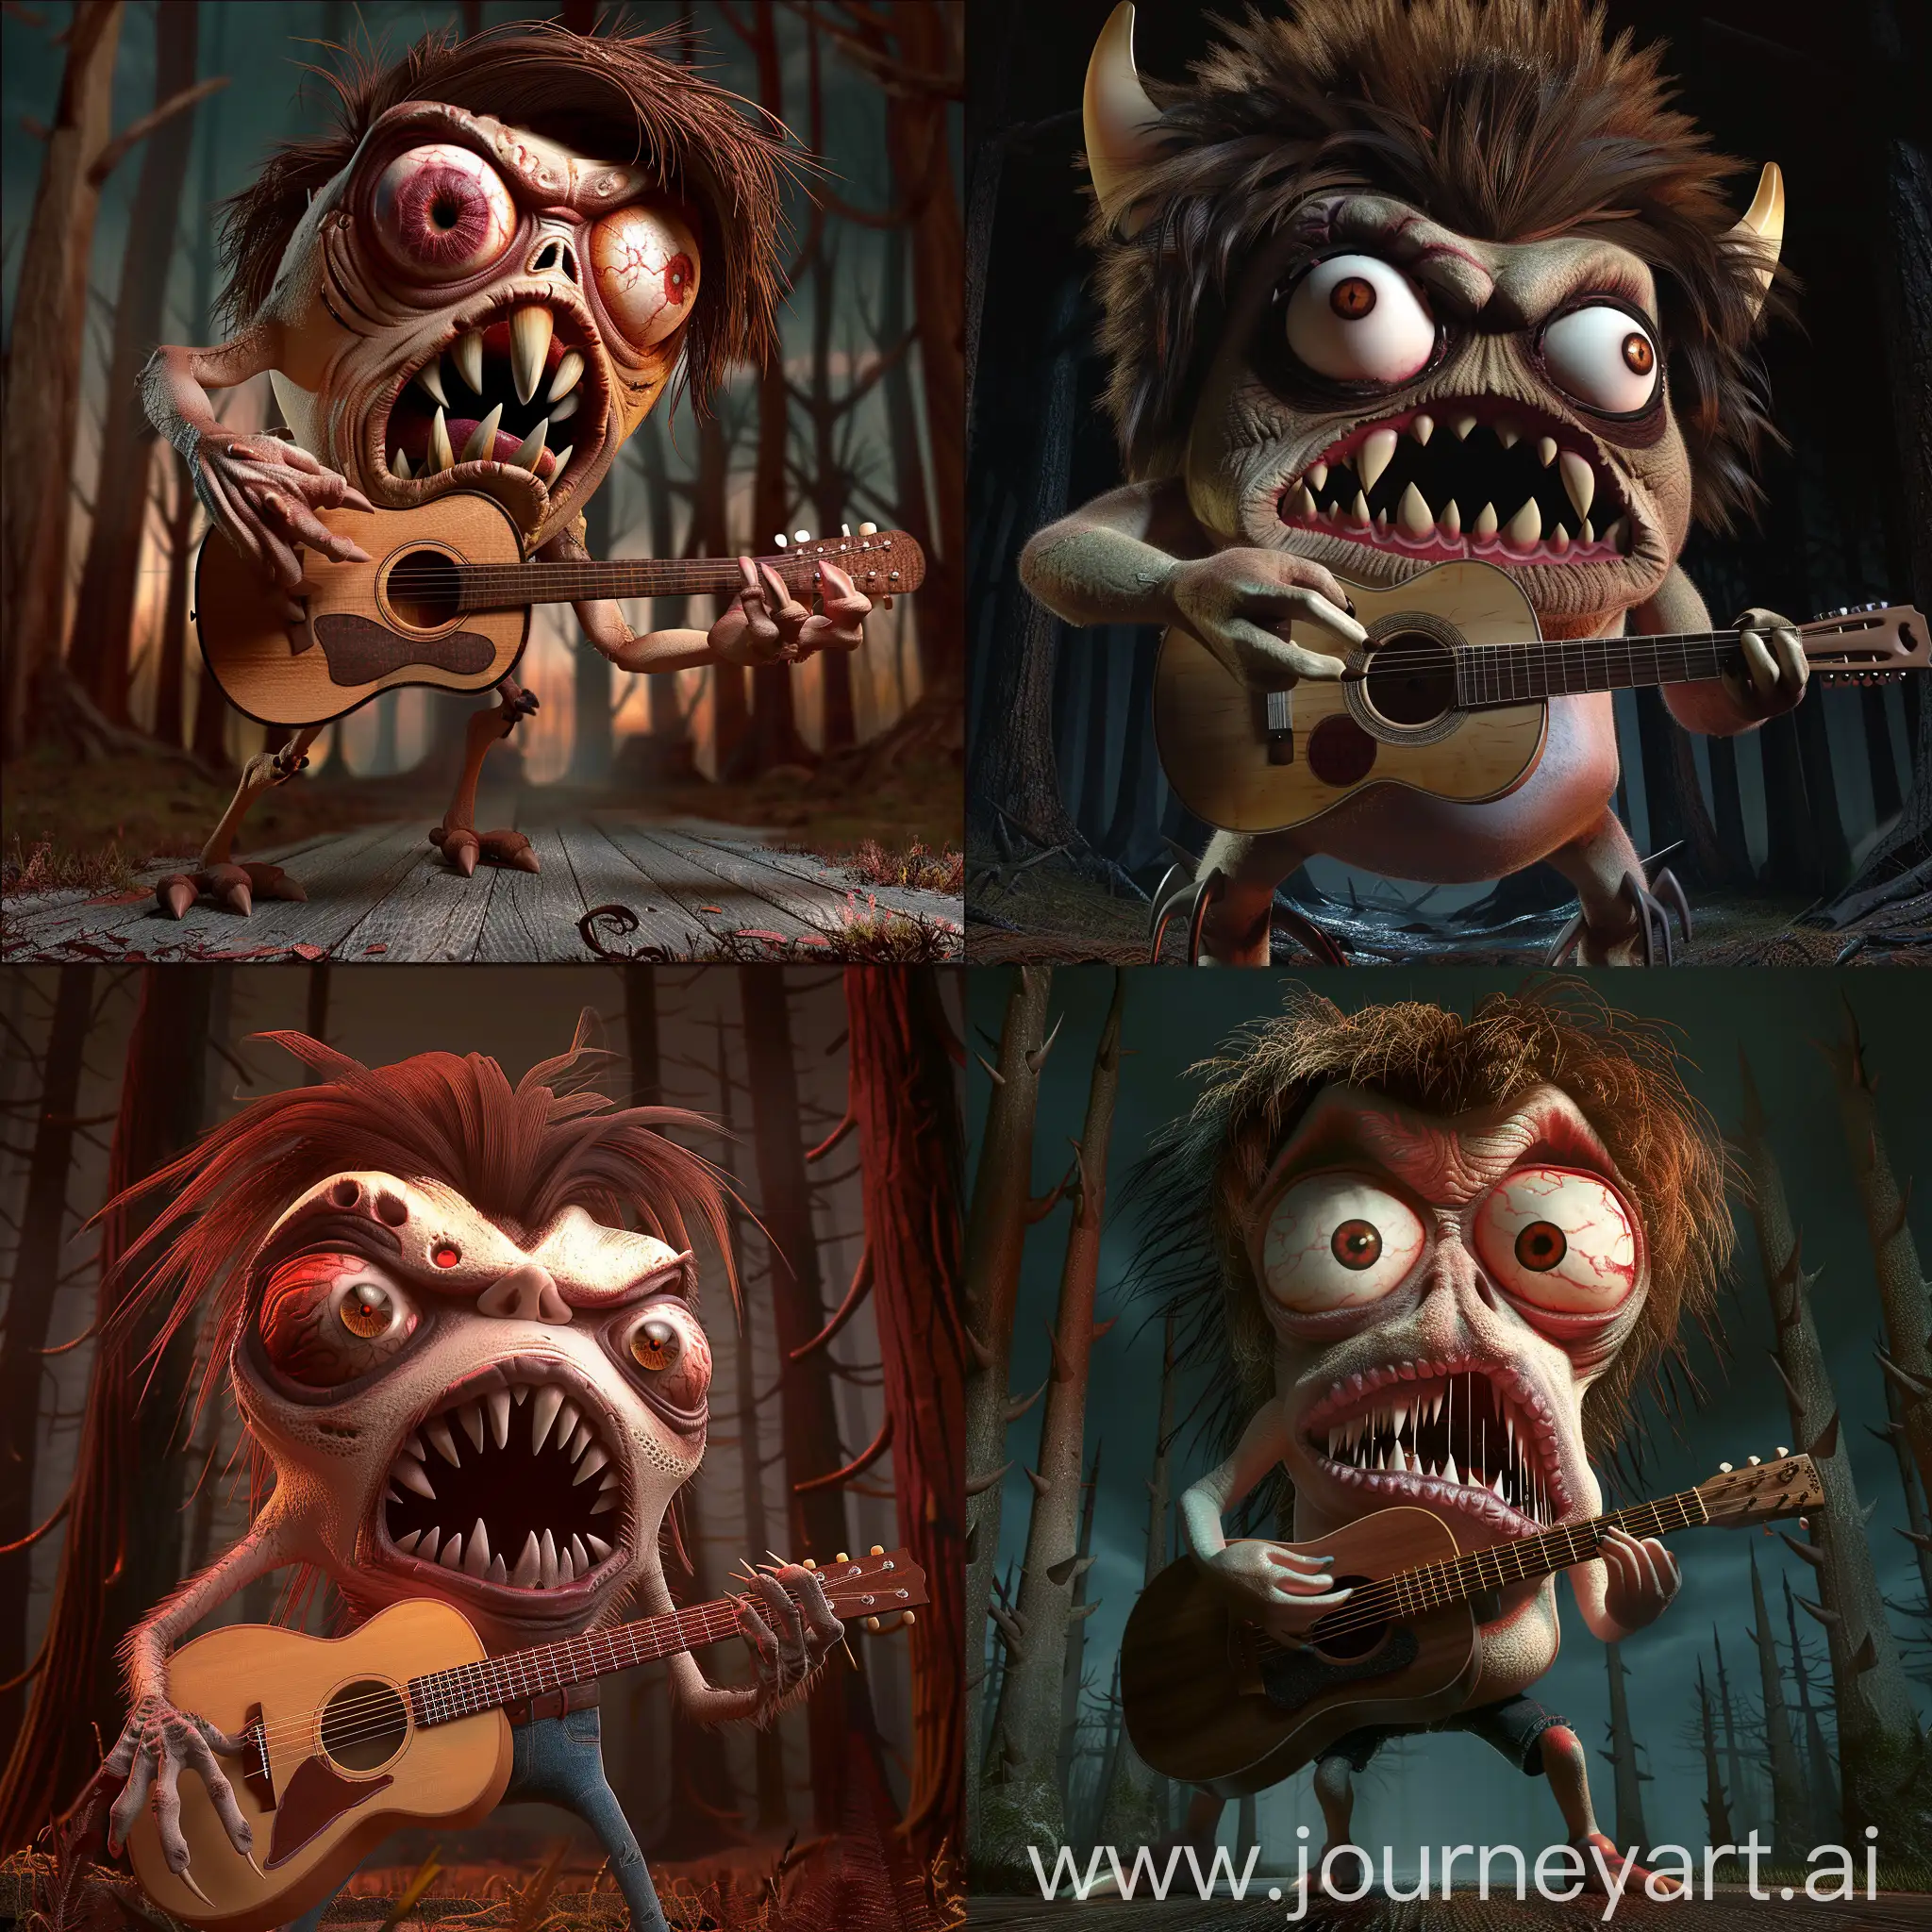 Scary-Cyclops-Mapinguari-Playing-Guitar-in-Dark-Forest-3D-Art